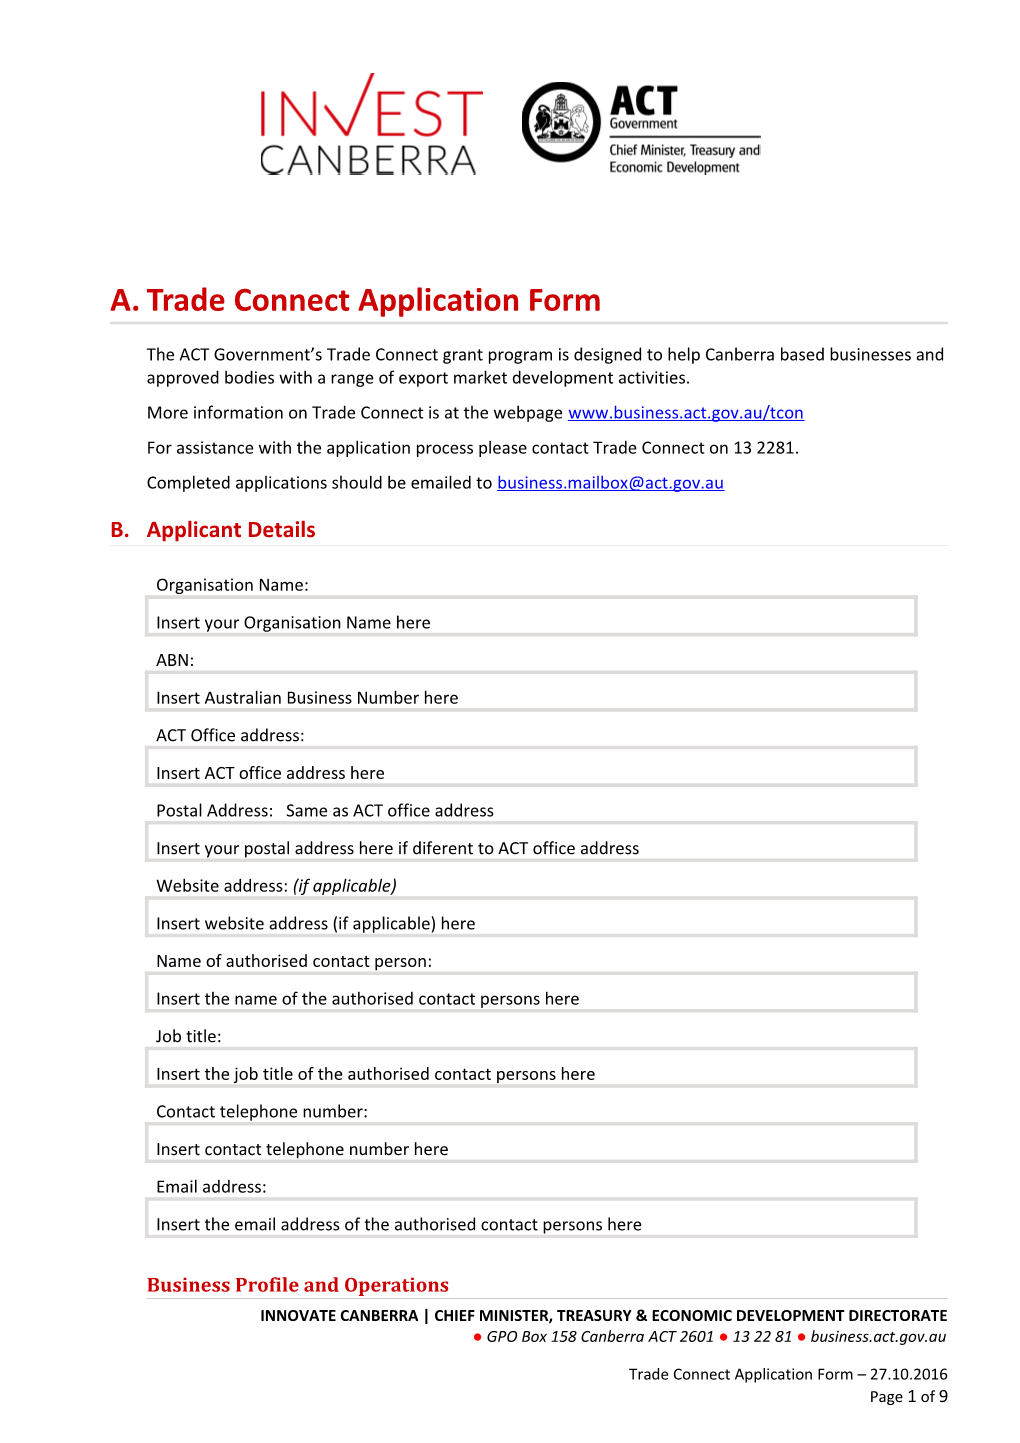 Trade Connect Application